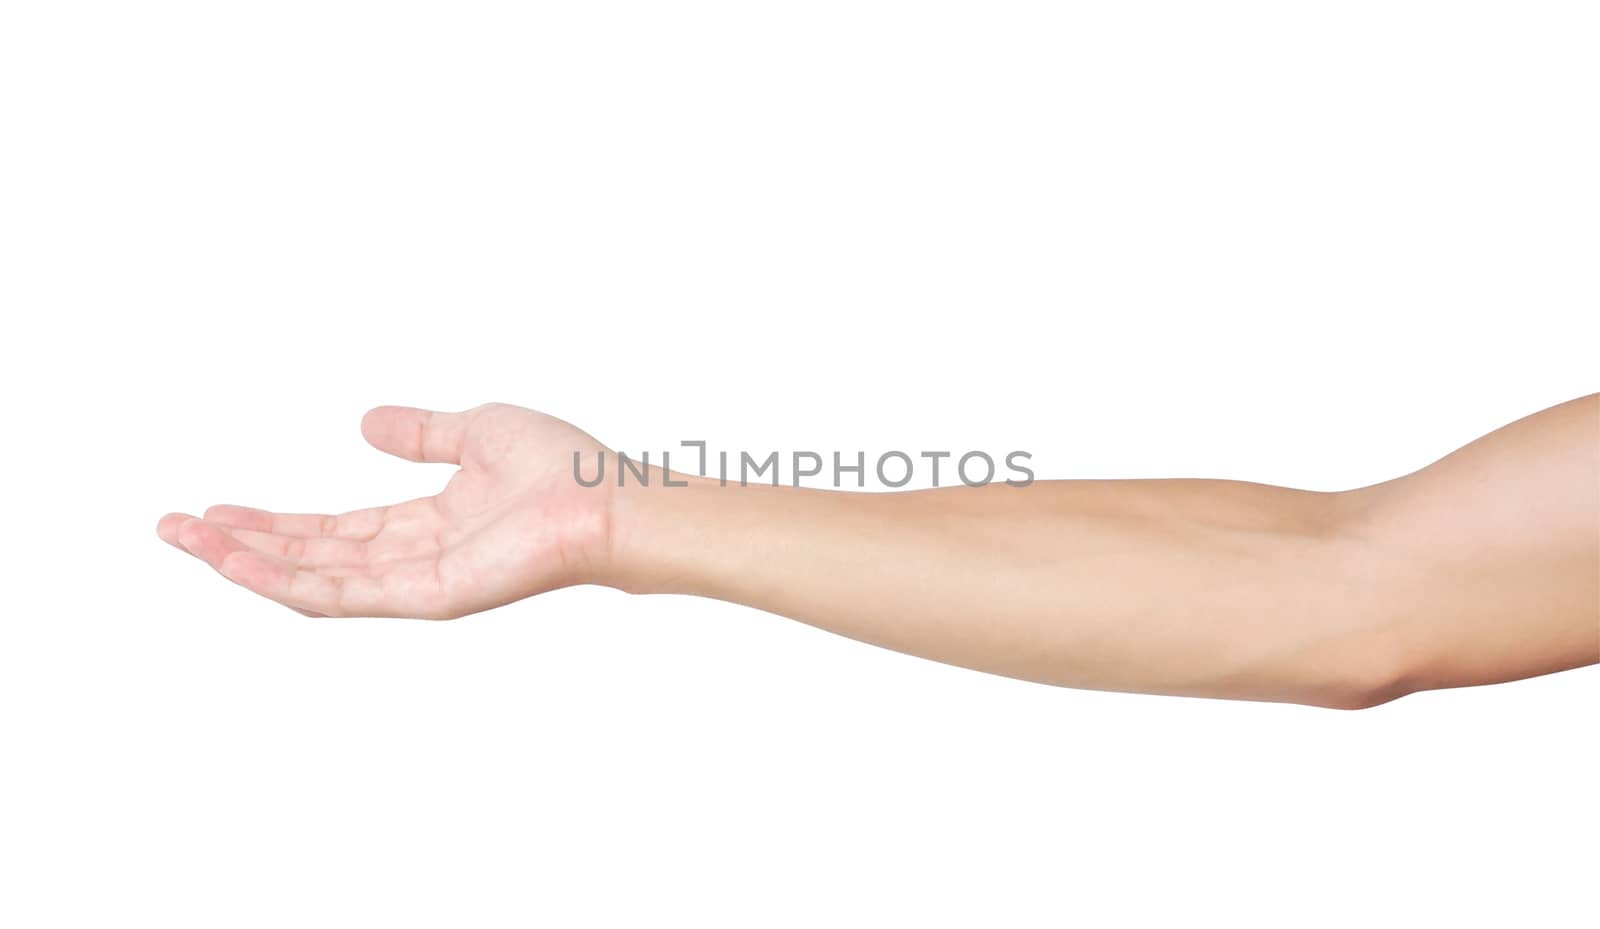 Man hands holding something on white background, clipping path by pt.pongsak@gmail.com